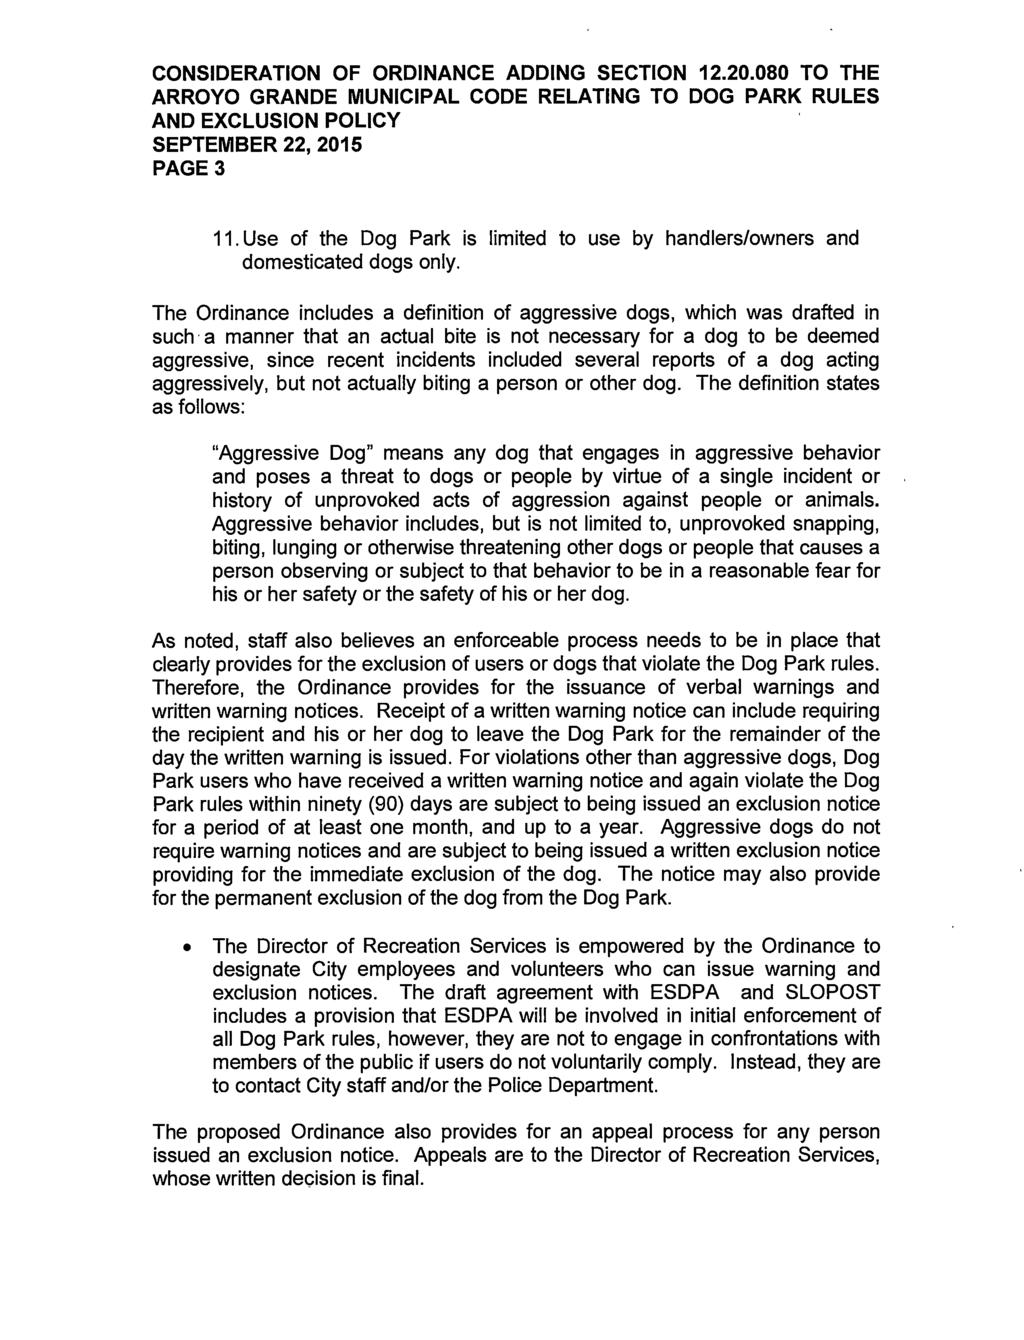 CONSIDERATION OF ORDINANCE ADDING SECTION 12.20.080 TO THE ARROYO GRANDE MUNICIPAL CODE RELATING TO DOG PARK RULES AND EXCLUSION POLICY SEPTEMBER 22, 2015 PAGE3 11.